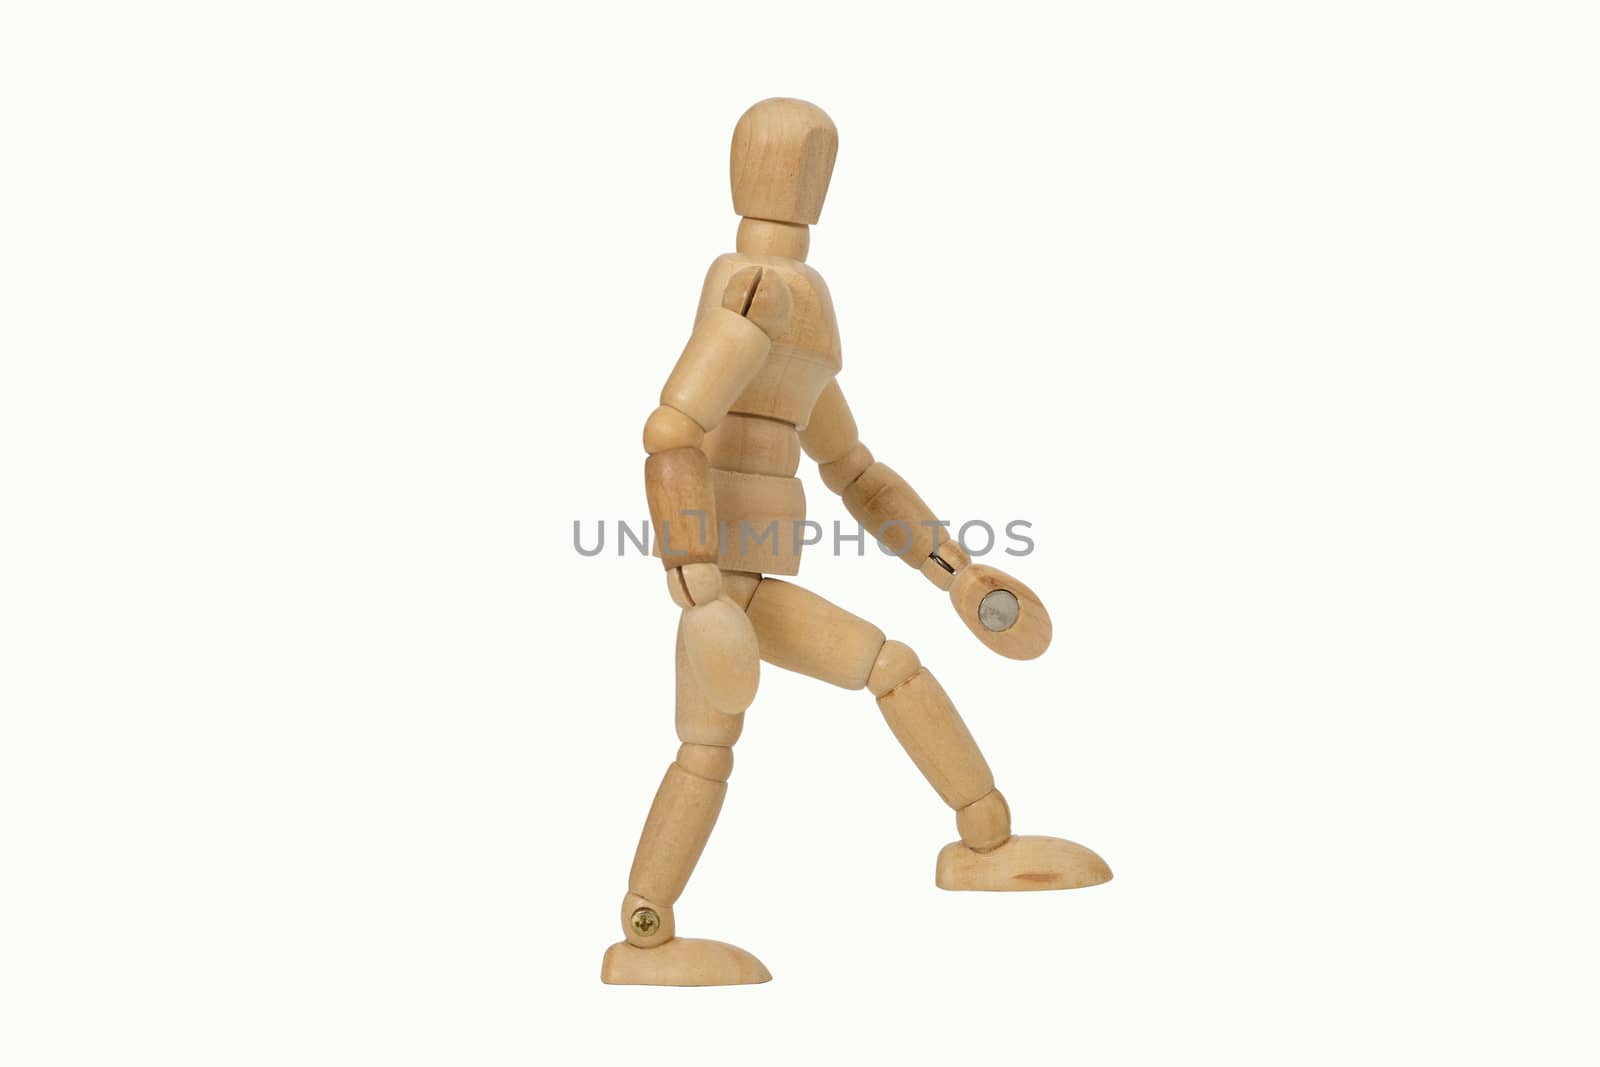 Wooden dummy going upstairs isolated on white background.